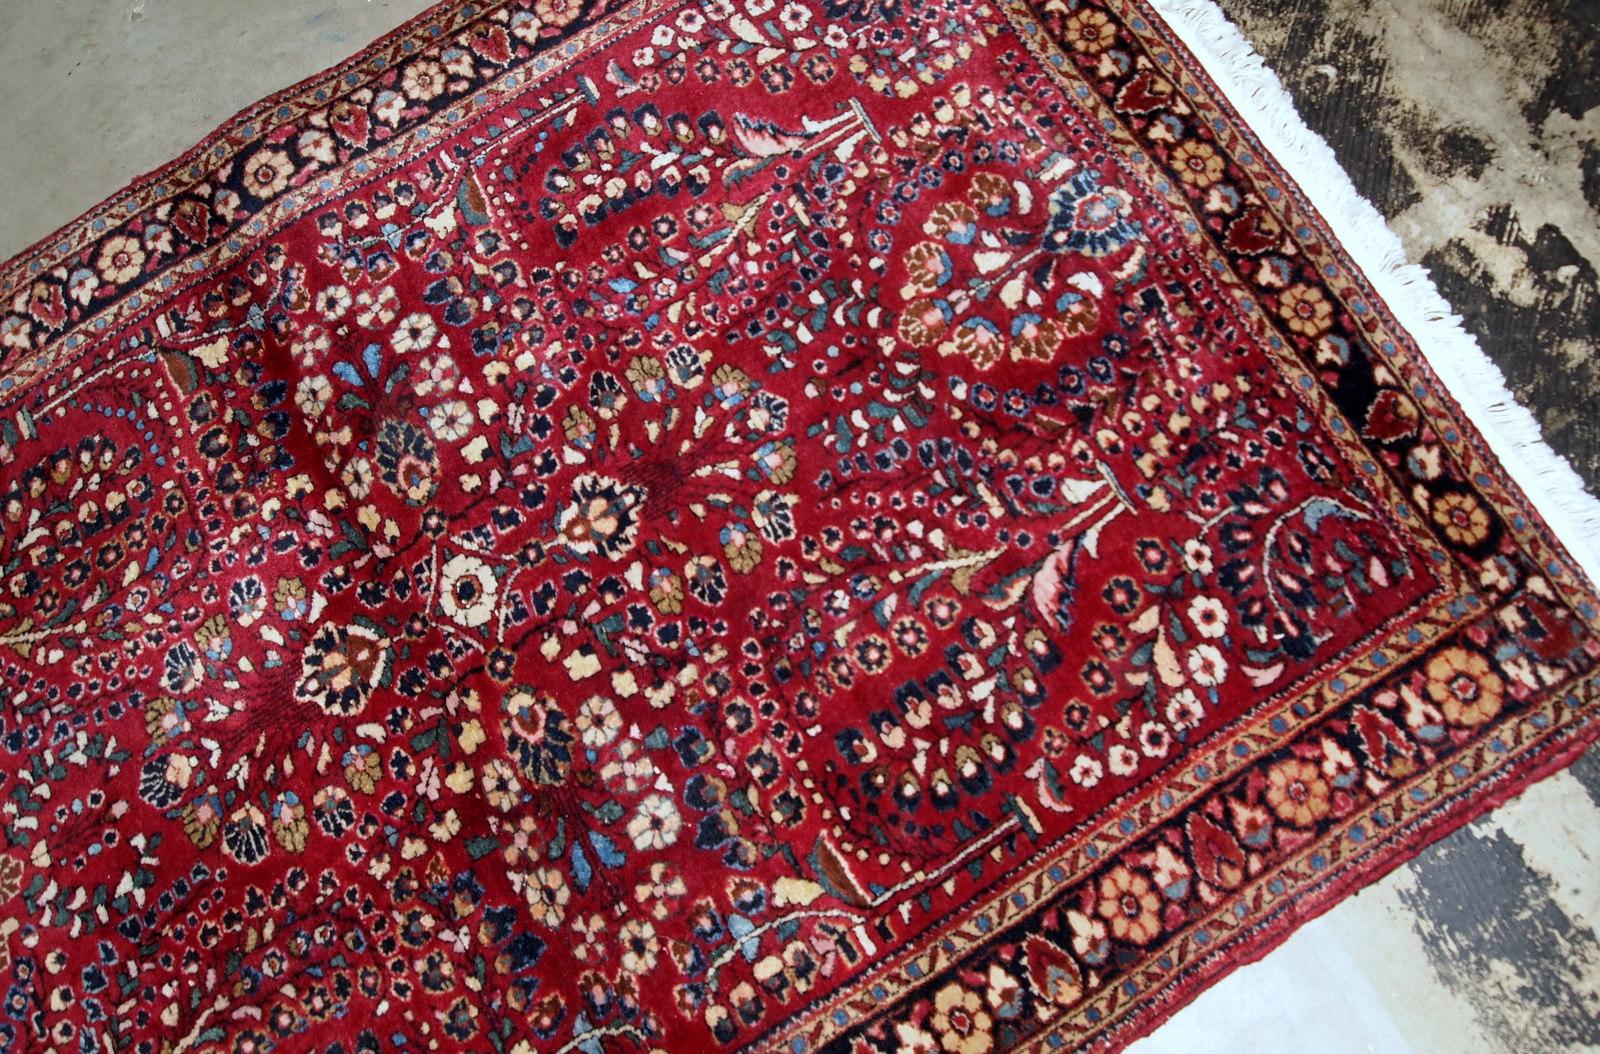 Handmade antique Sarouk rug in bright red color. The rug is in original good condition from the beginning of 20th century.

?-condition: original good,

-circa: 1920s,

-size: 3.2' x 5.3' (97cm x 151cm),

-material: wool,

-country of